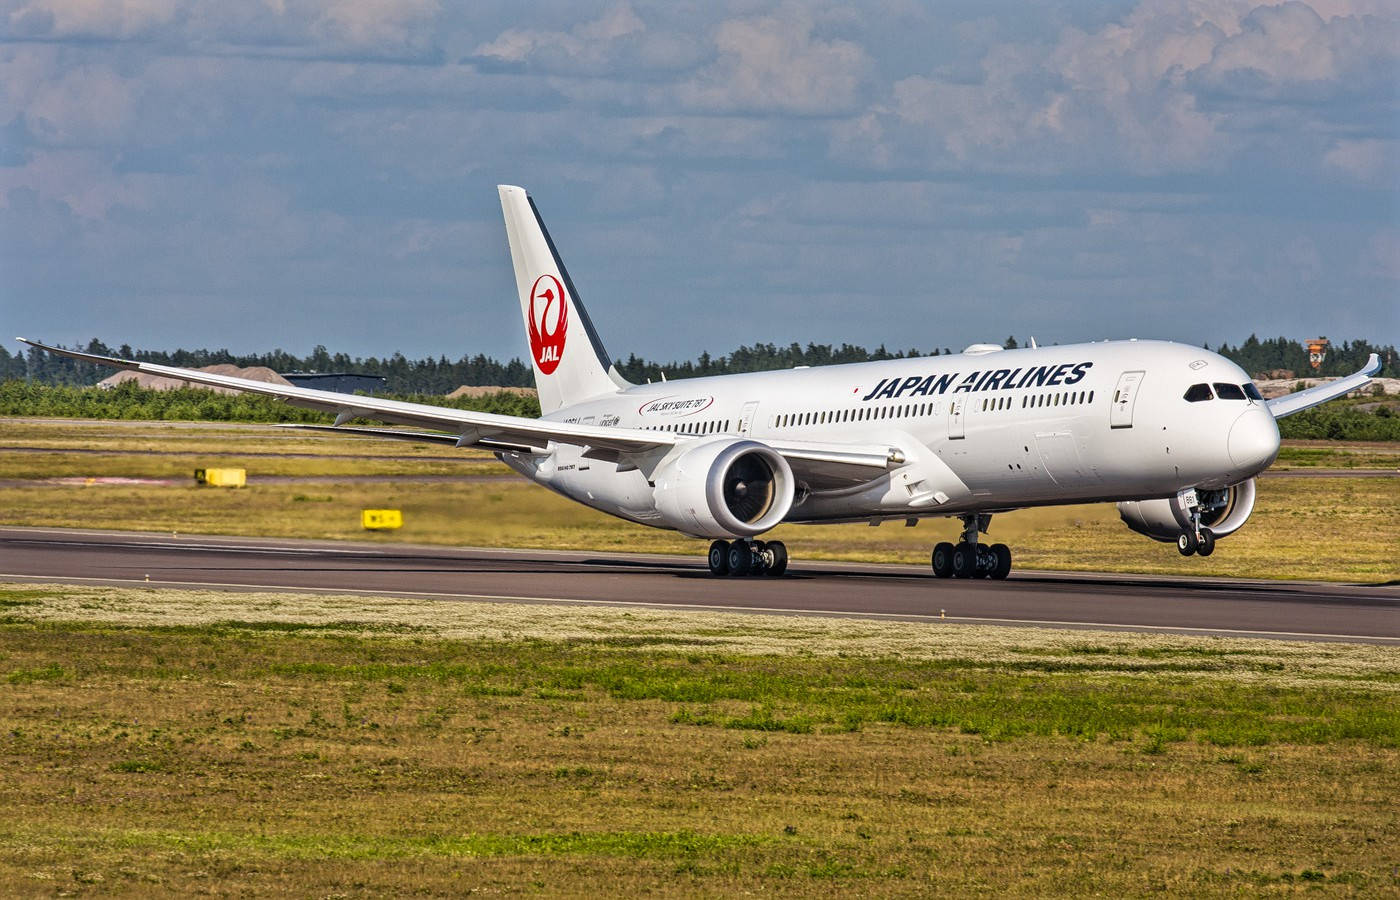 Japan Airlines Departure Taxiway Wallpaper